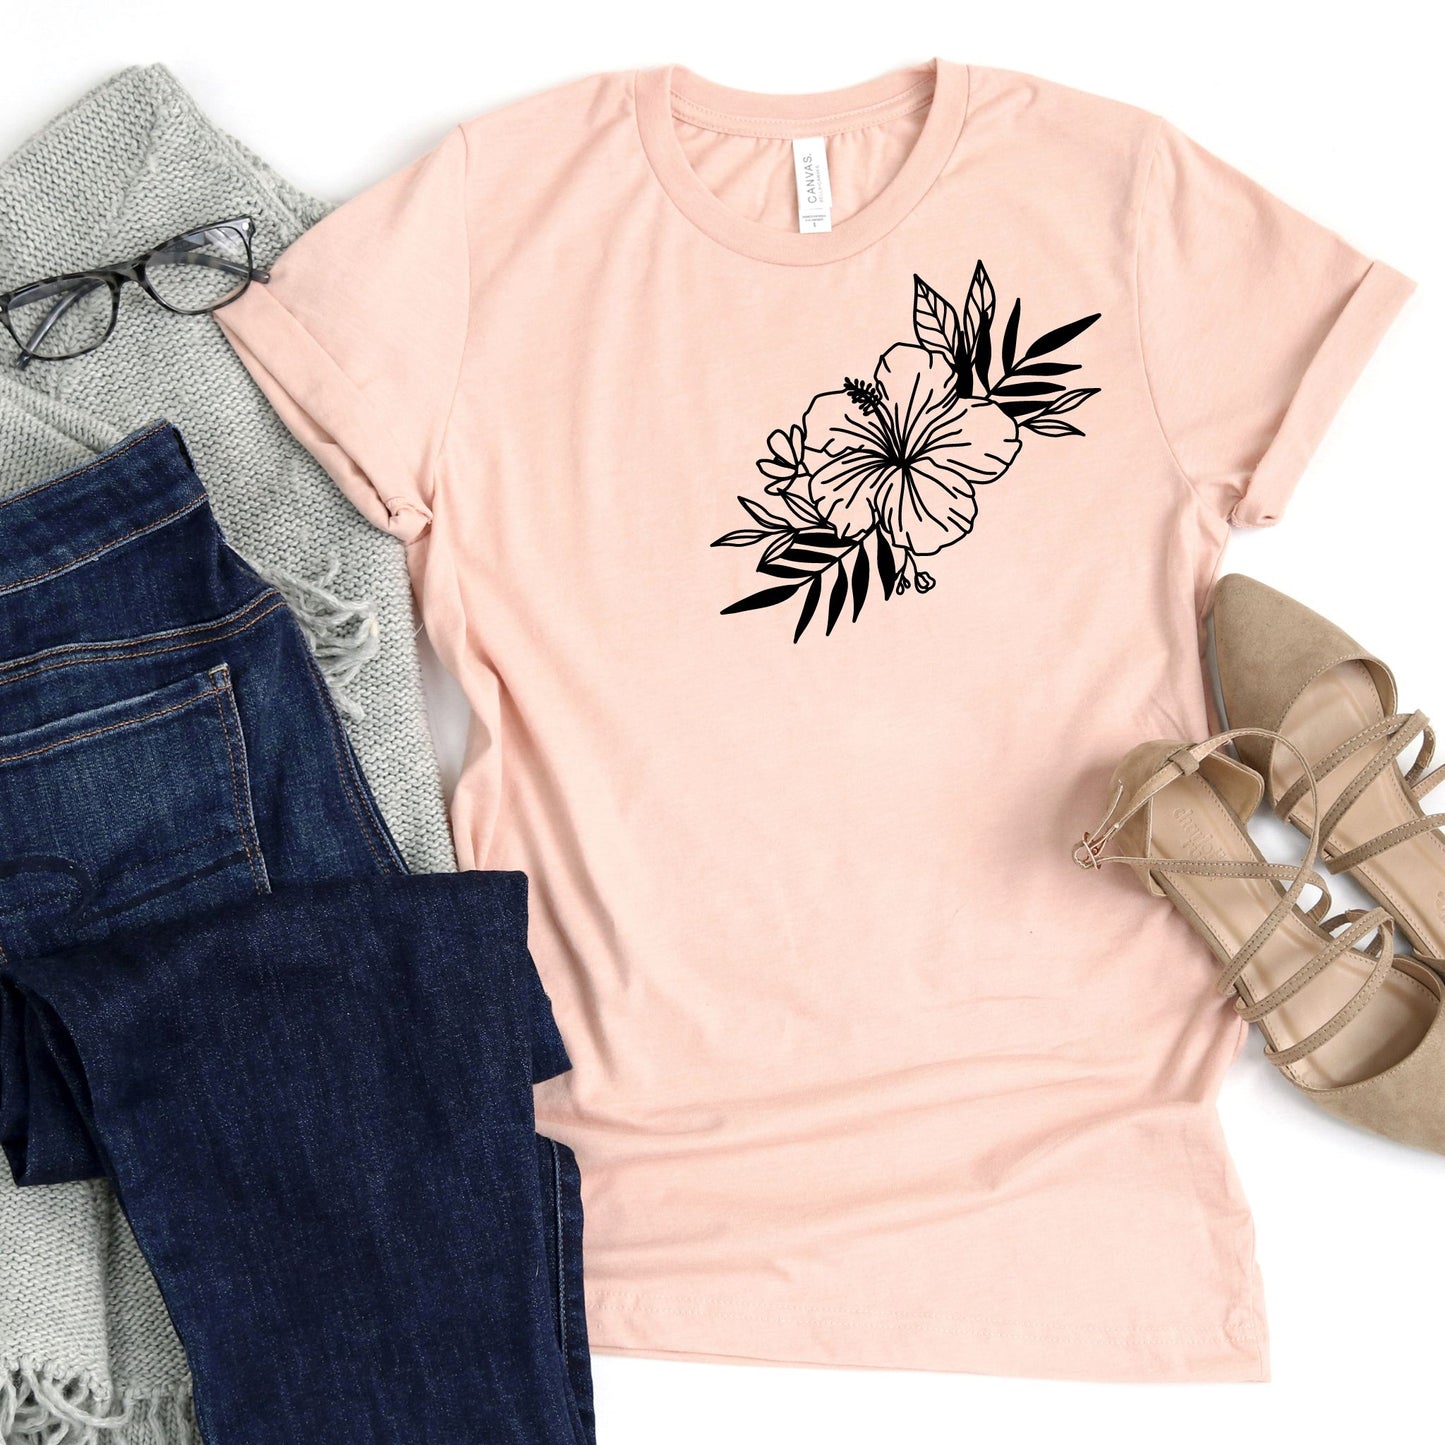 Hibiscus Graphic Tee in Heather Peach